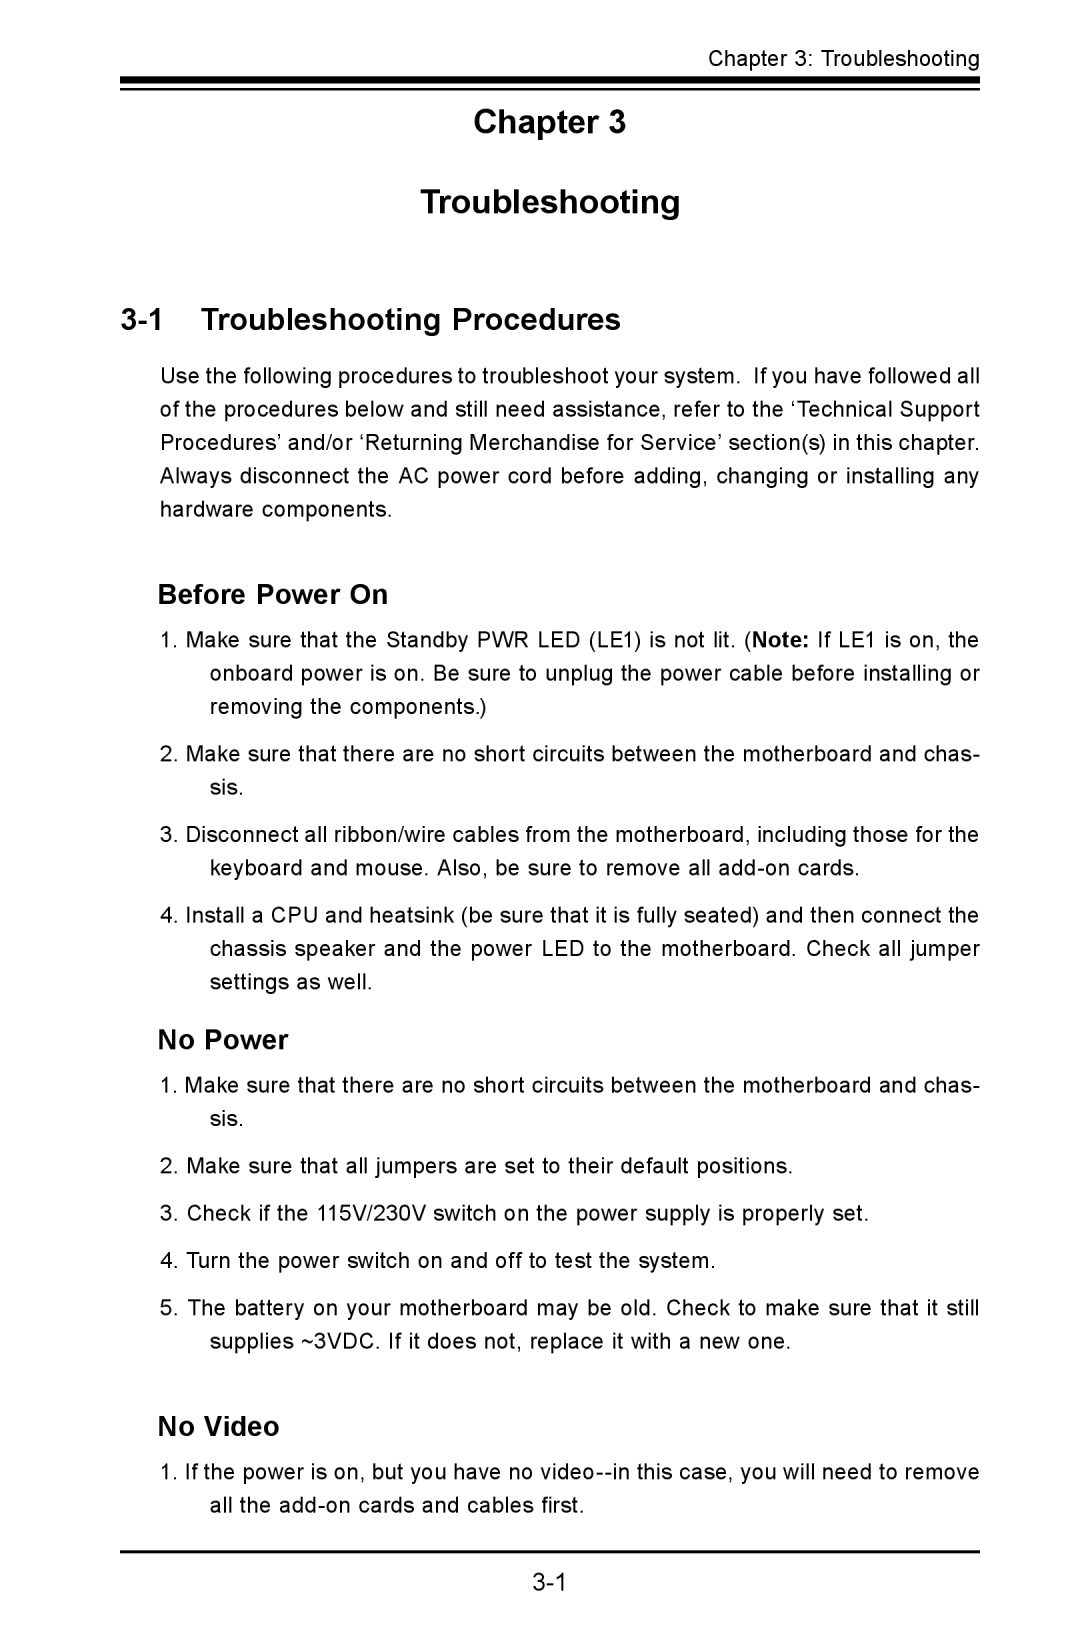 SUPER MICRO Computer X8SIA-F user manual Troubleshooting Procedures, Before Power On, No Power, No Video 